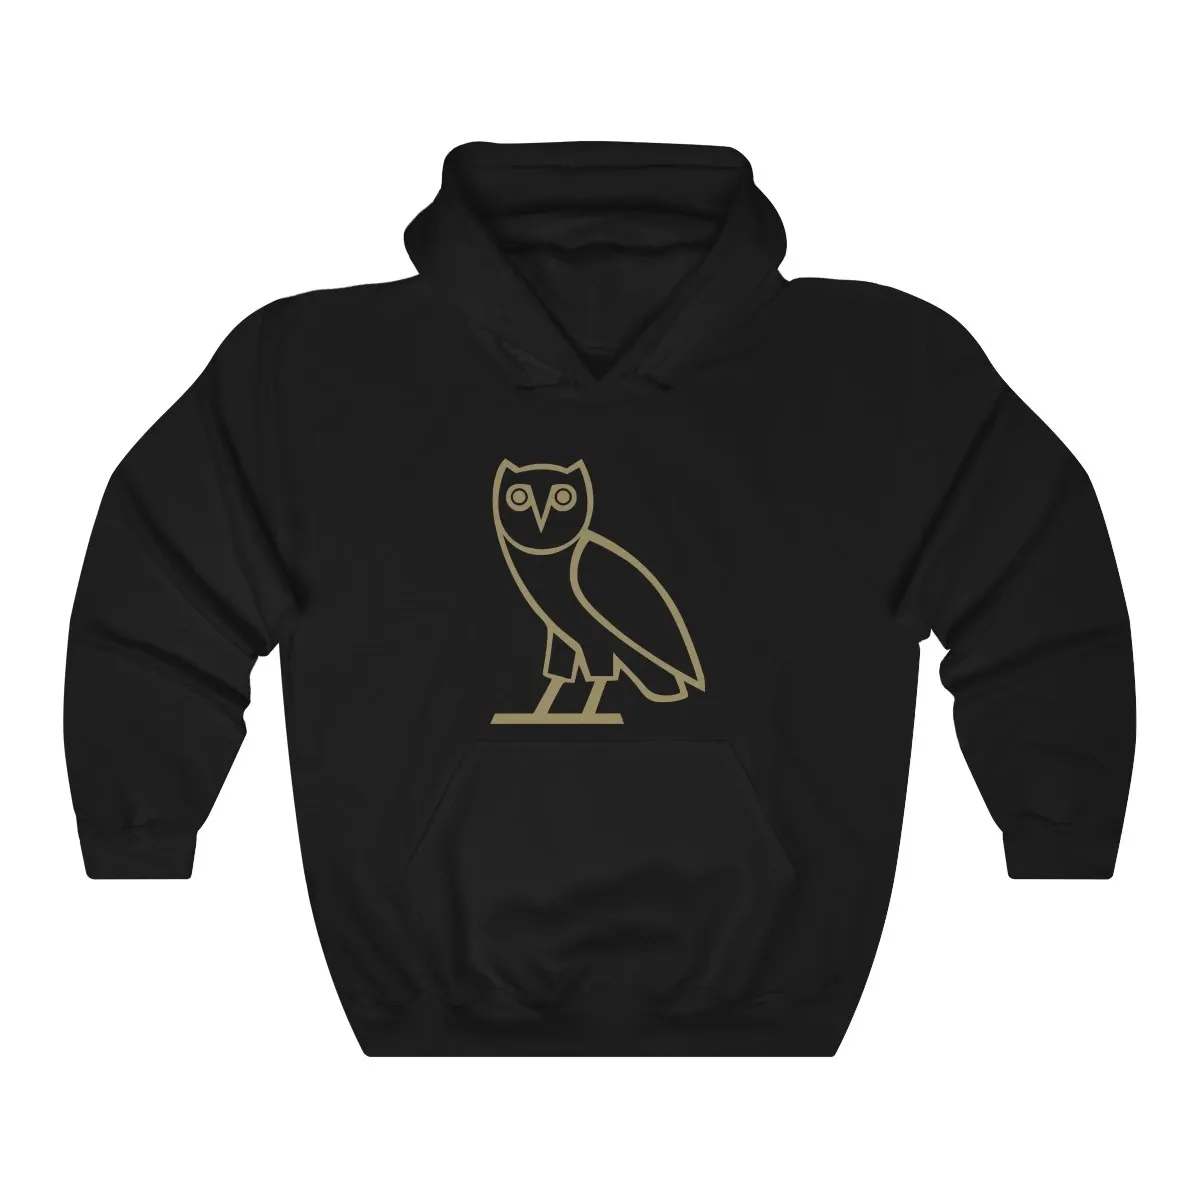 Hooded Ovo Drake October's Ovoxo Very Own Owl Gang Hip Hop